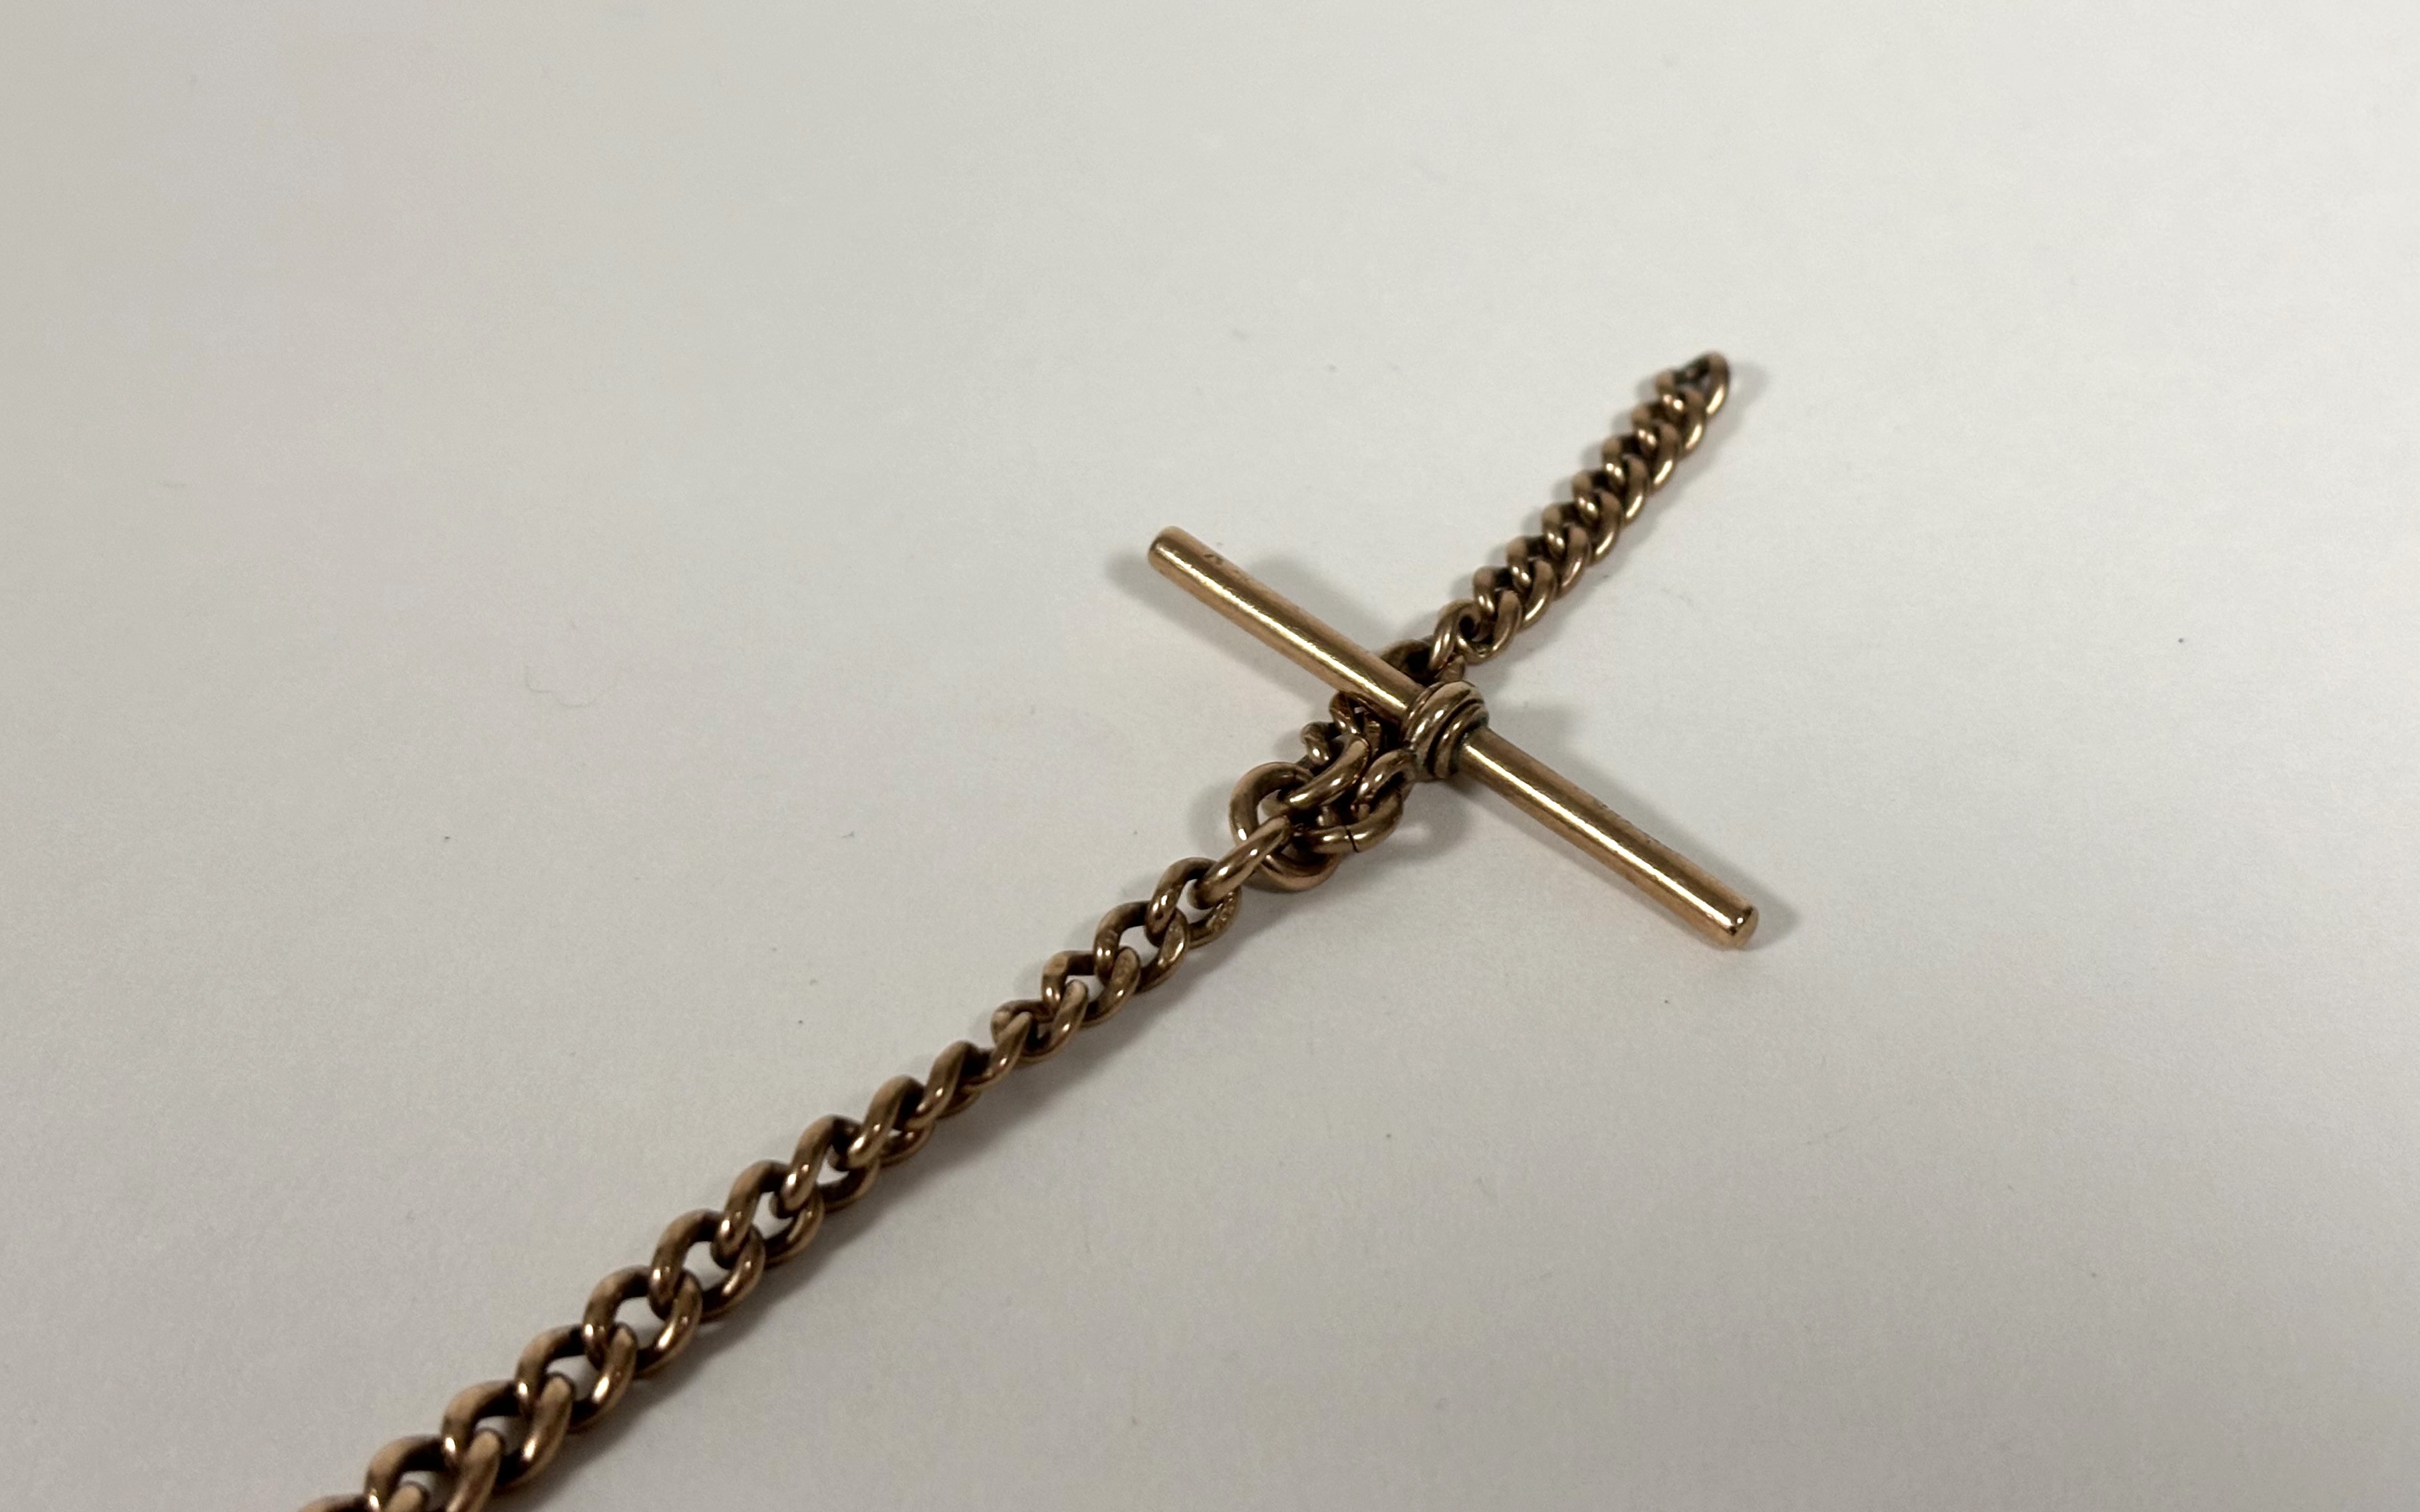 A 9ct gold curblink Albert watch chain, with T-bar, the chain stamped "375", the T-bar "9c".